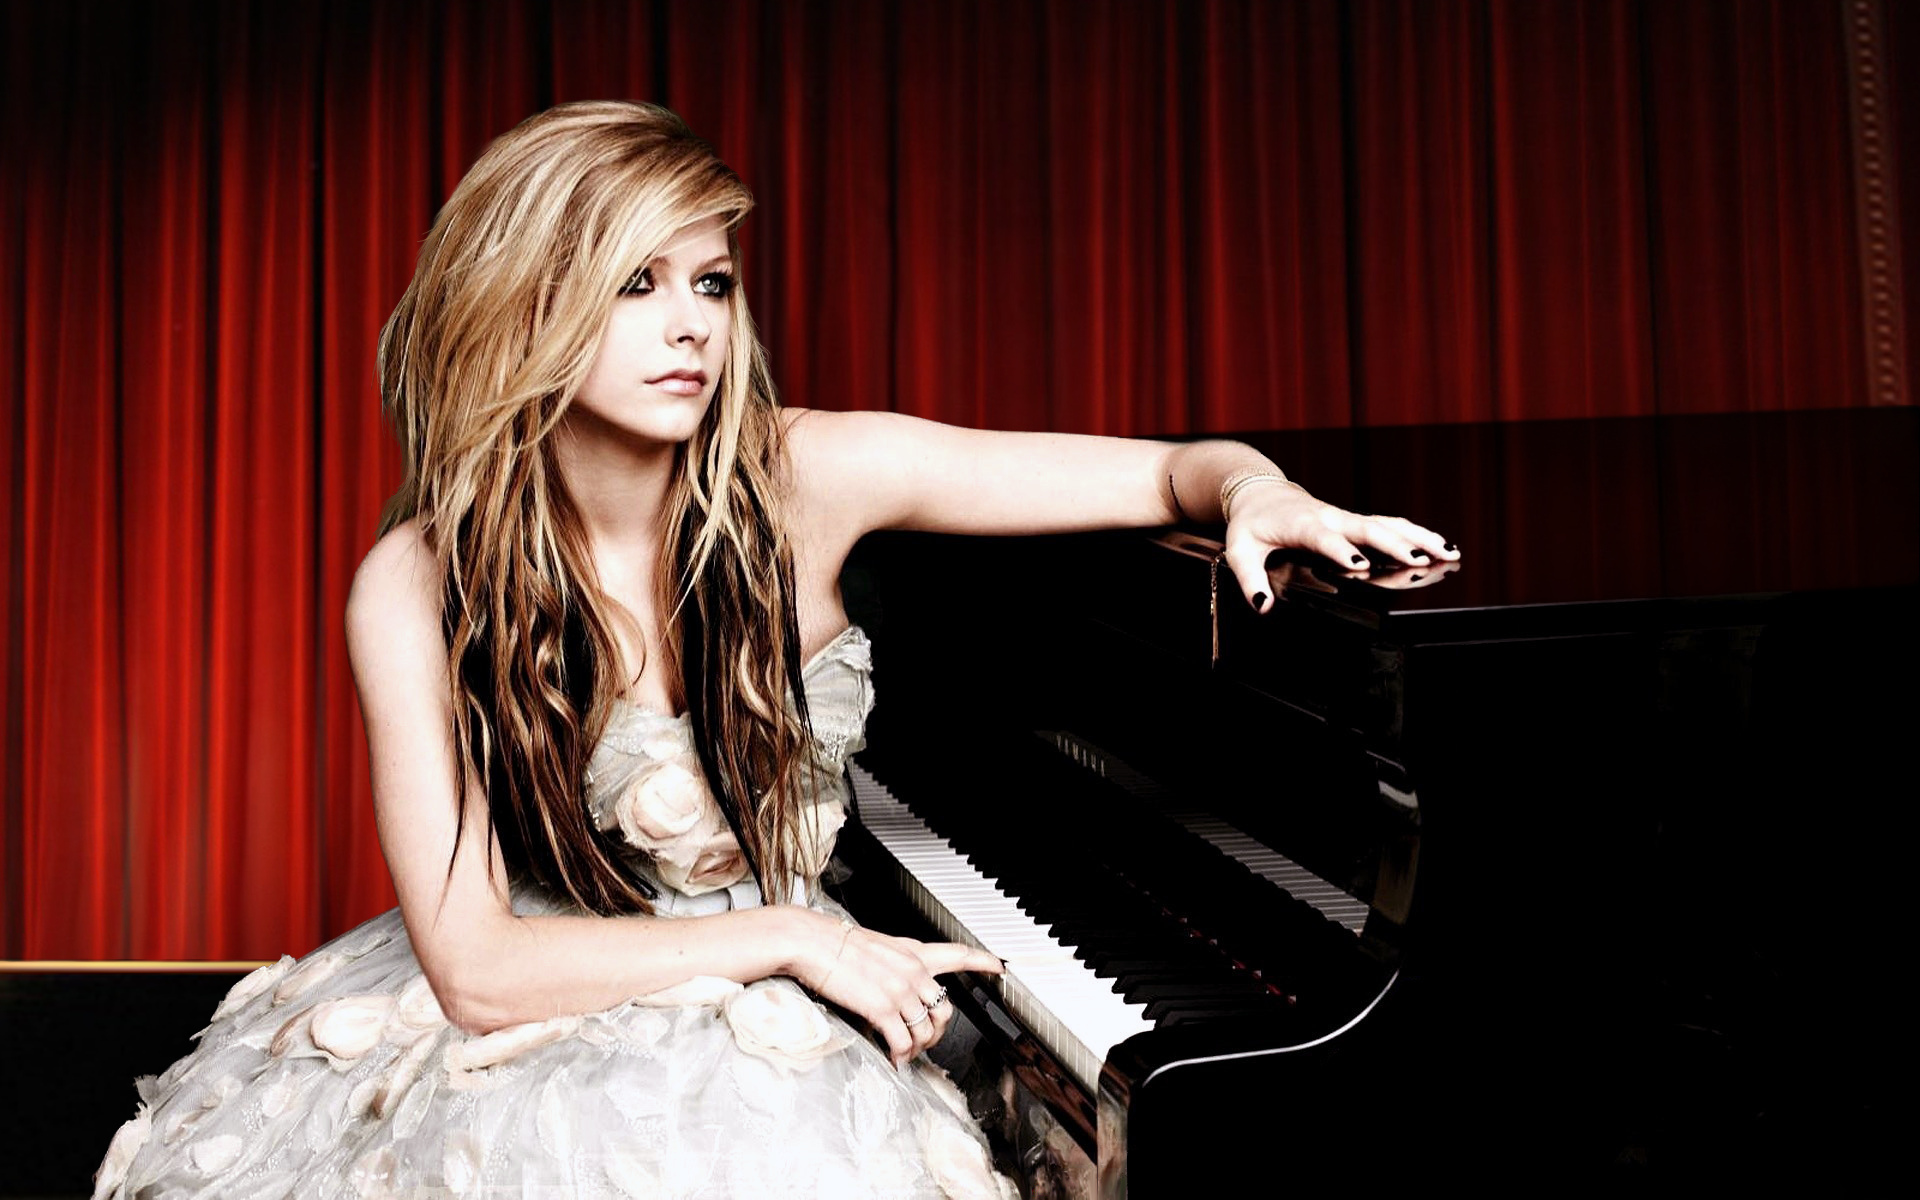  Avril Lavigne HD Android Wallpapers